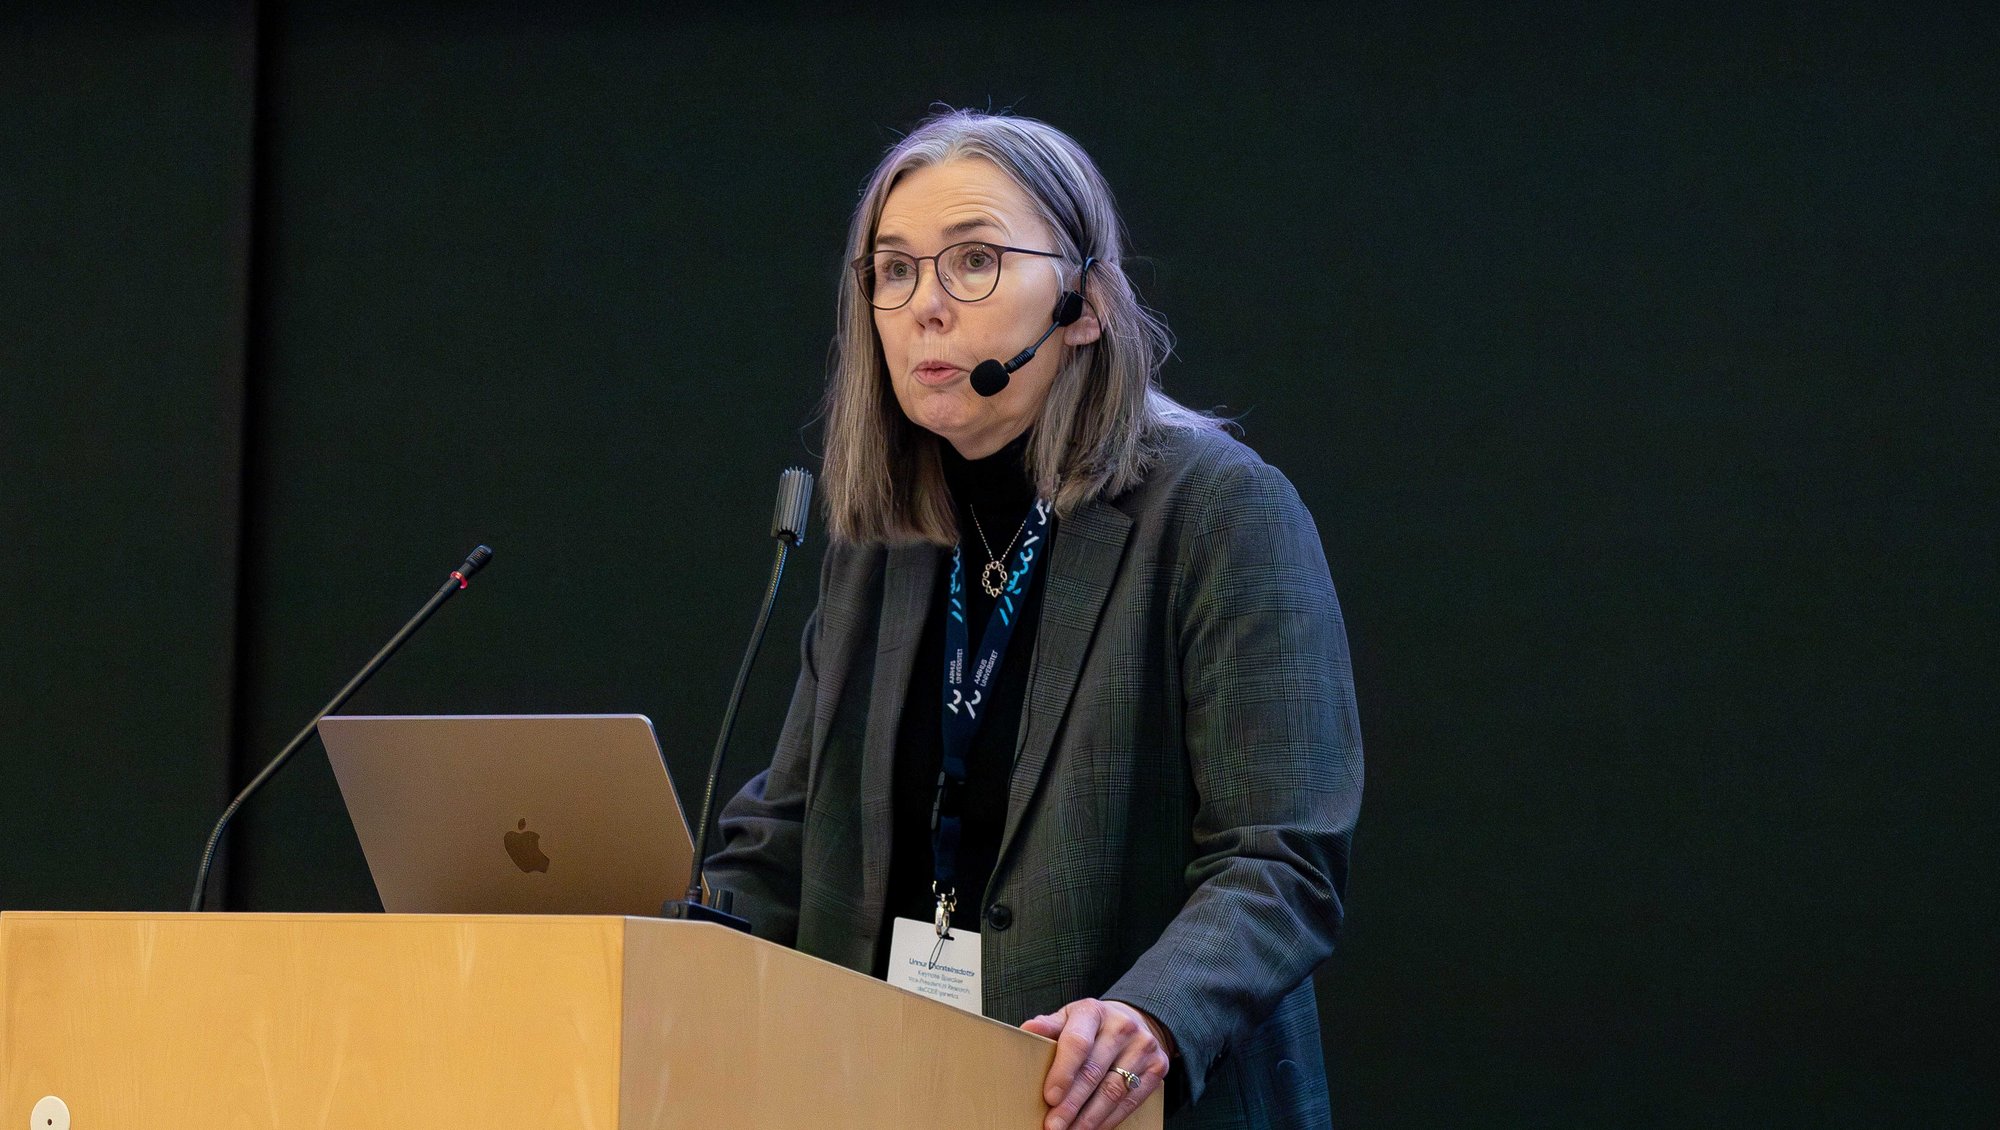 The dean of the Faculty of Health Sciences at the University of Iceland and Vice President of Research at DeCODE Genetics, Unnur Thorsteinsdottir, delivers today's first keynote. Photo: Sebastian Skousgaard, AU Health.